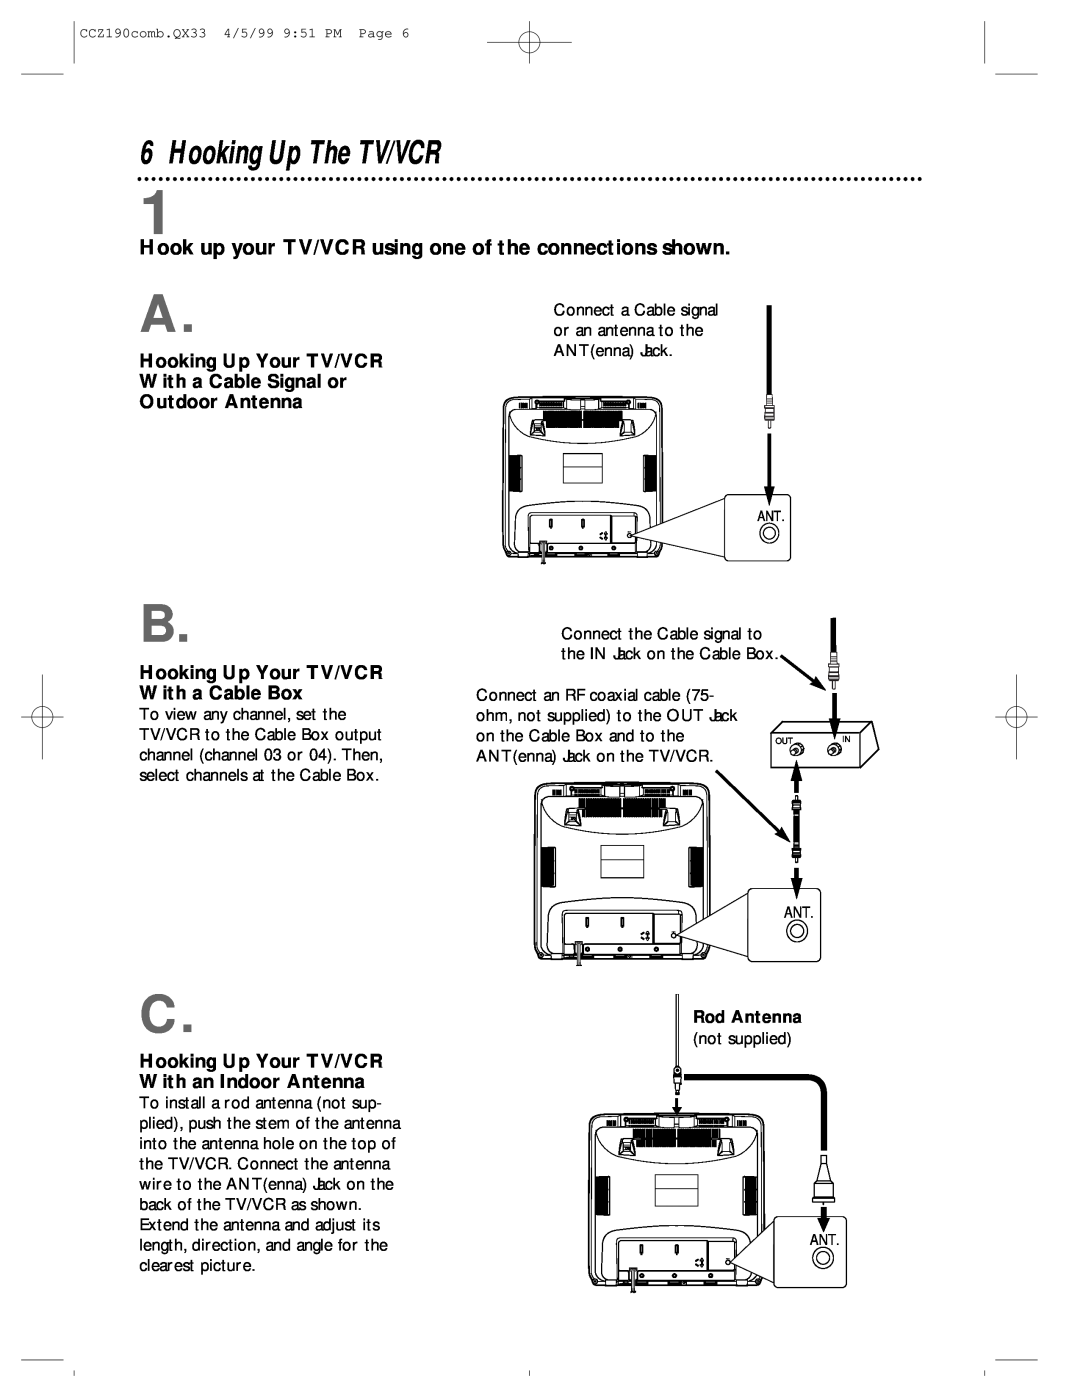 Magnavox CCZ190AT owner manual Hooking Up The TV/VCR, Hook up your TV/VCR using one of the connections shown 